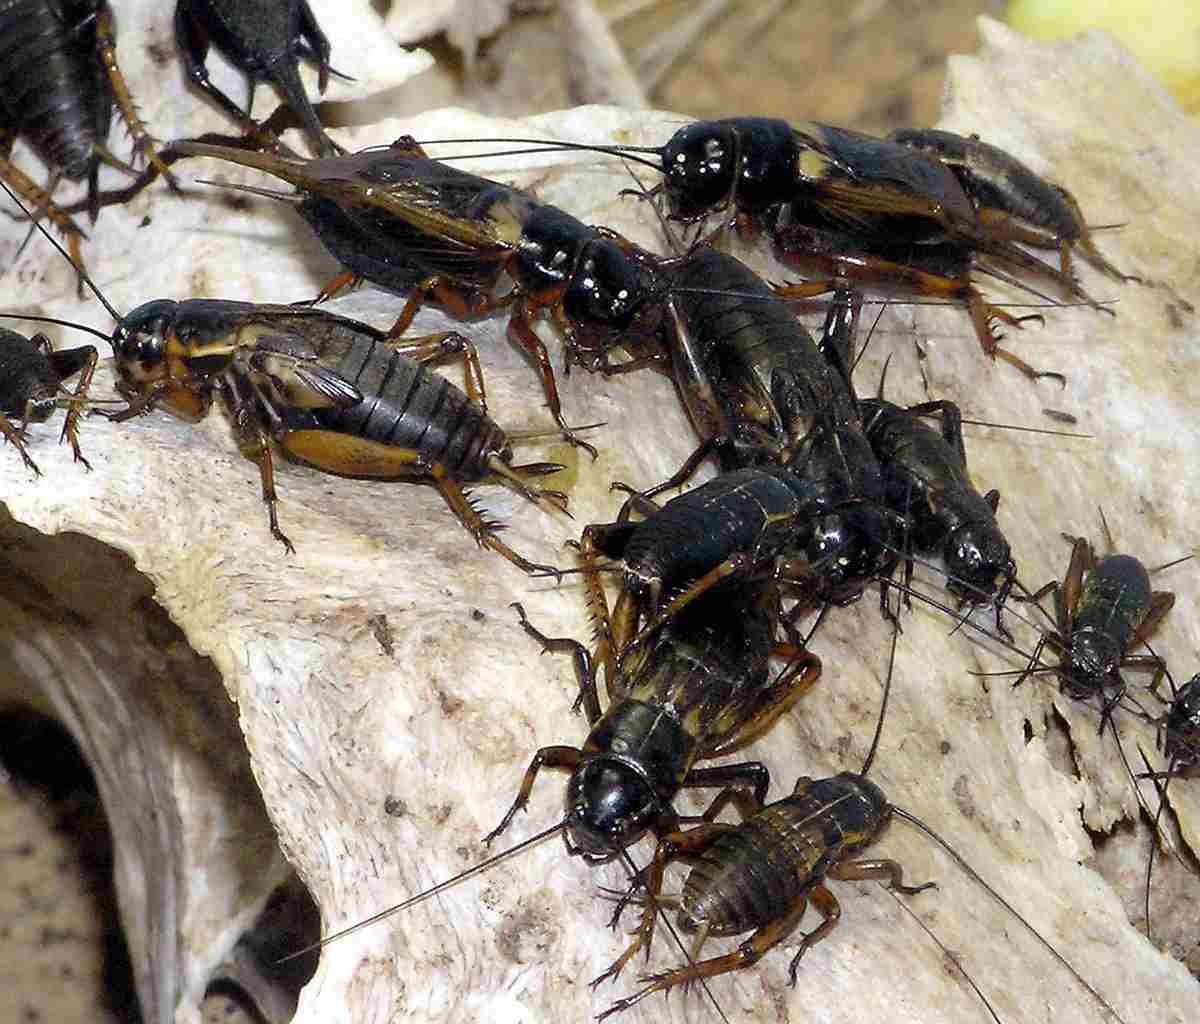 Are Crickets Decomposers: The Classification of Crickets as Decomposers is Often Linked to Their Detritivorous and Scavenging Behaviors (Credit: Arpingstone 2005)